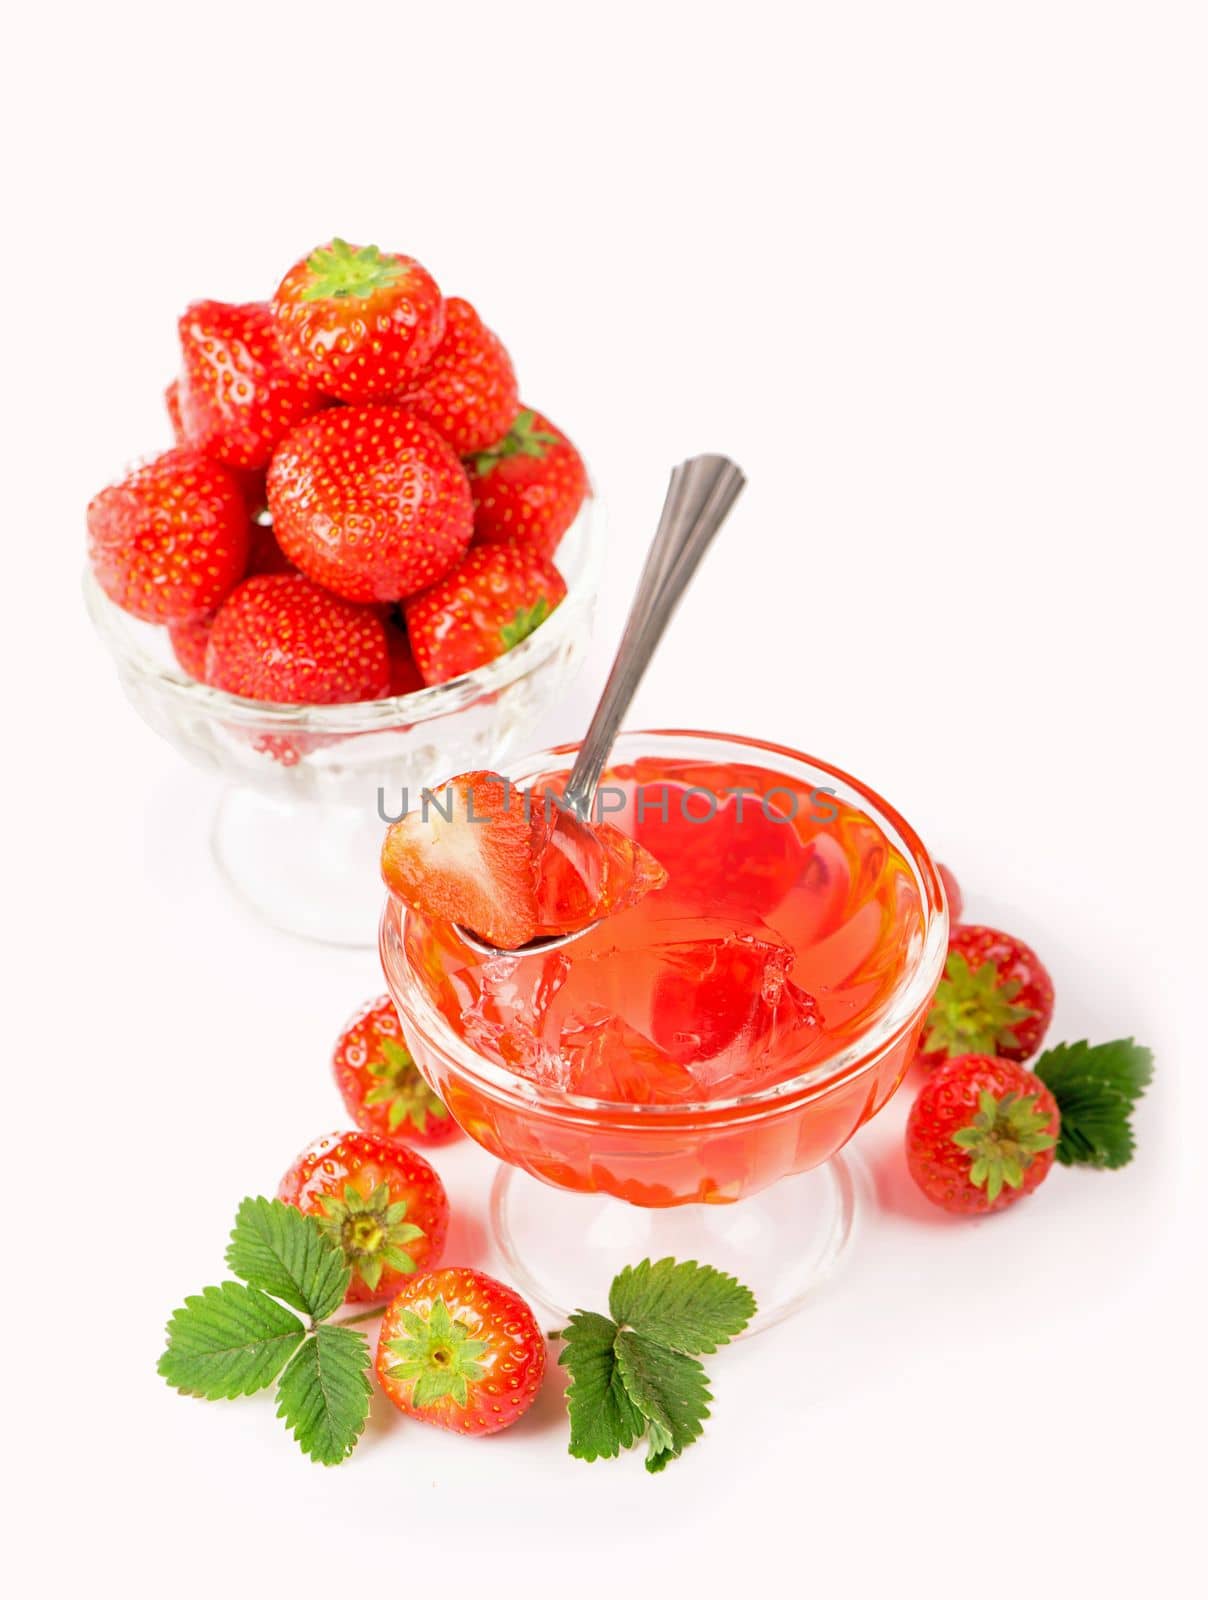 Cream bowl, bowl with fresh strawberries and sweet strawberry jelly against white background by aprilphoto